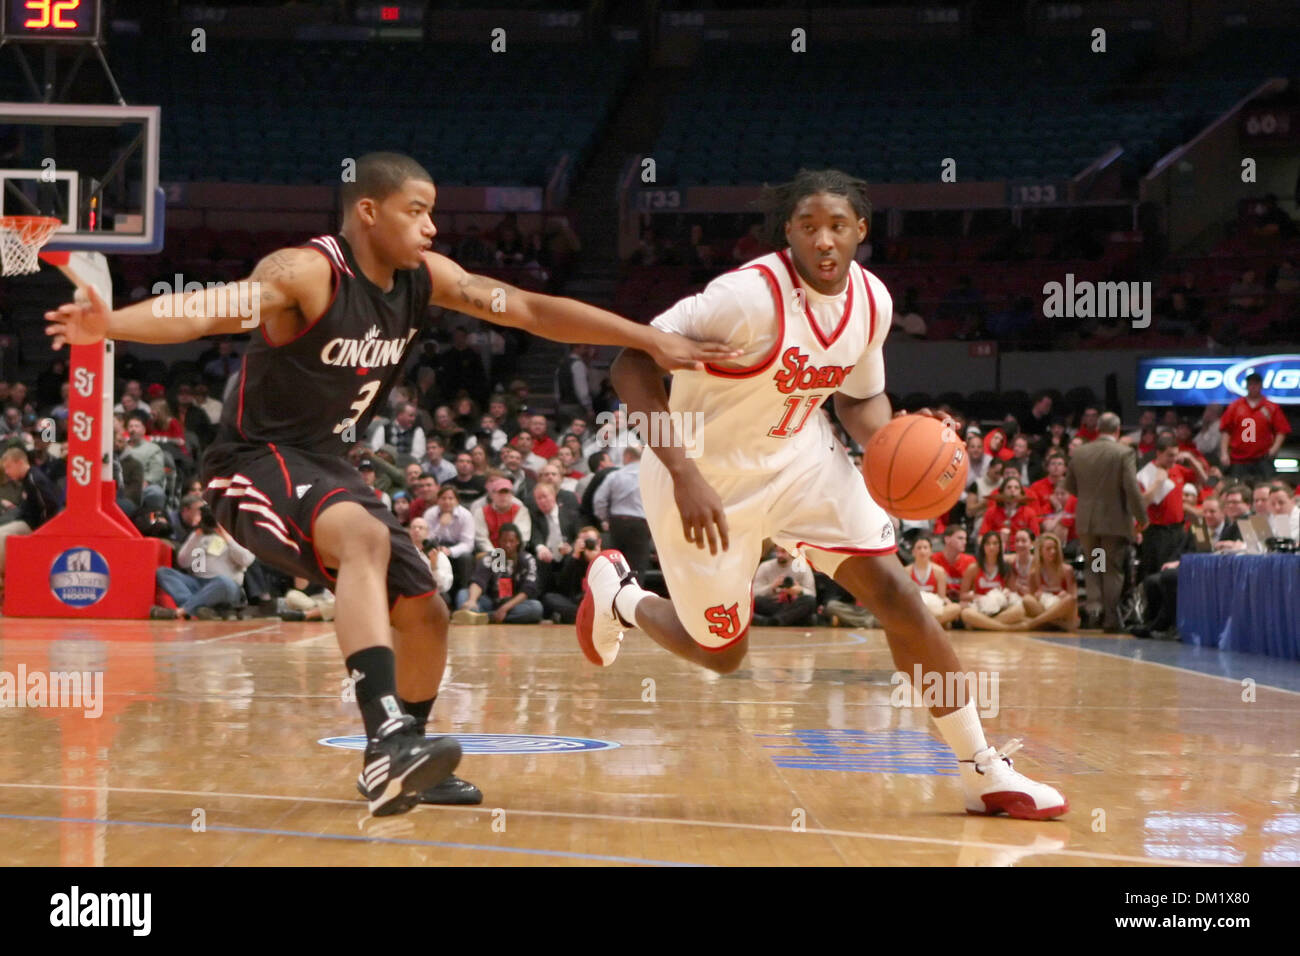 St Johns #11 Omari Lawrence drives past Cincinatti's #3 Dion Dixon.   St. Johns defeated Cincinatti 52-50 in the gamel held at Madison Square Garden, New York. (Credit Image: © Anthony Gruppuso/Southcreek Global/ZUMApress.com) Stock Photo